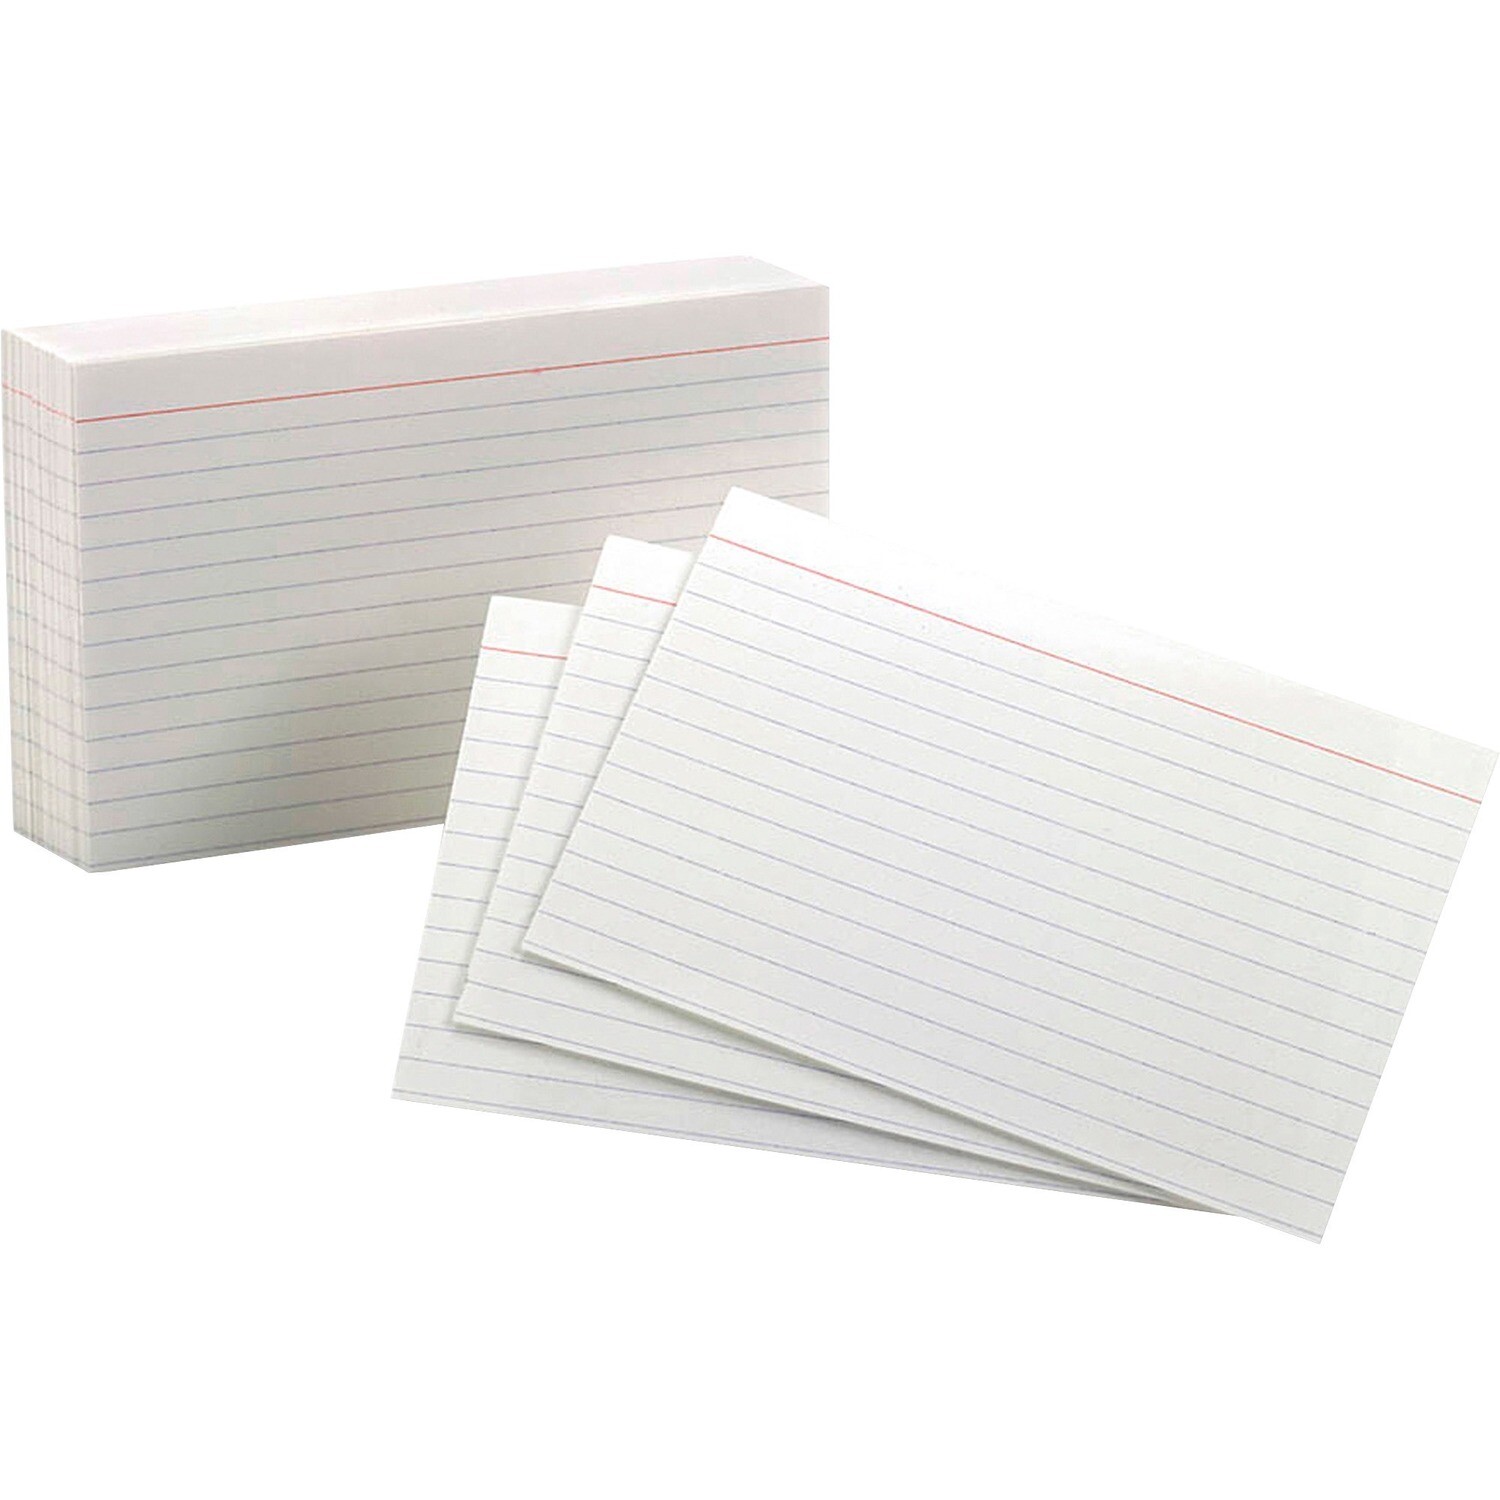 Index Cards, Ruled, White  4" x 6", 100 Pack, Oxford